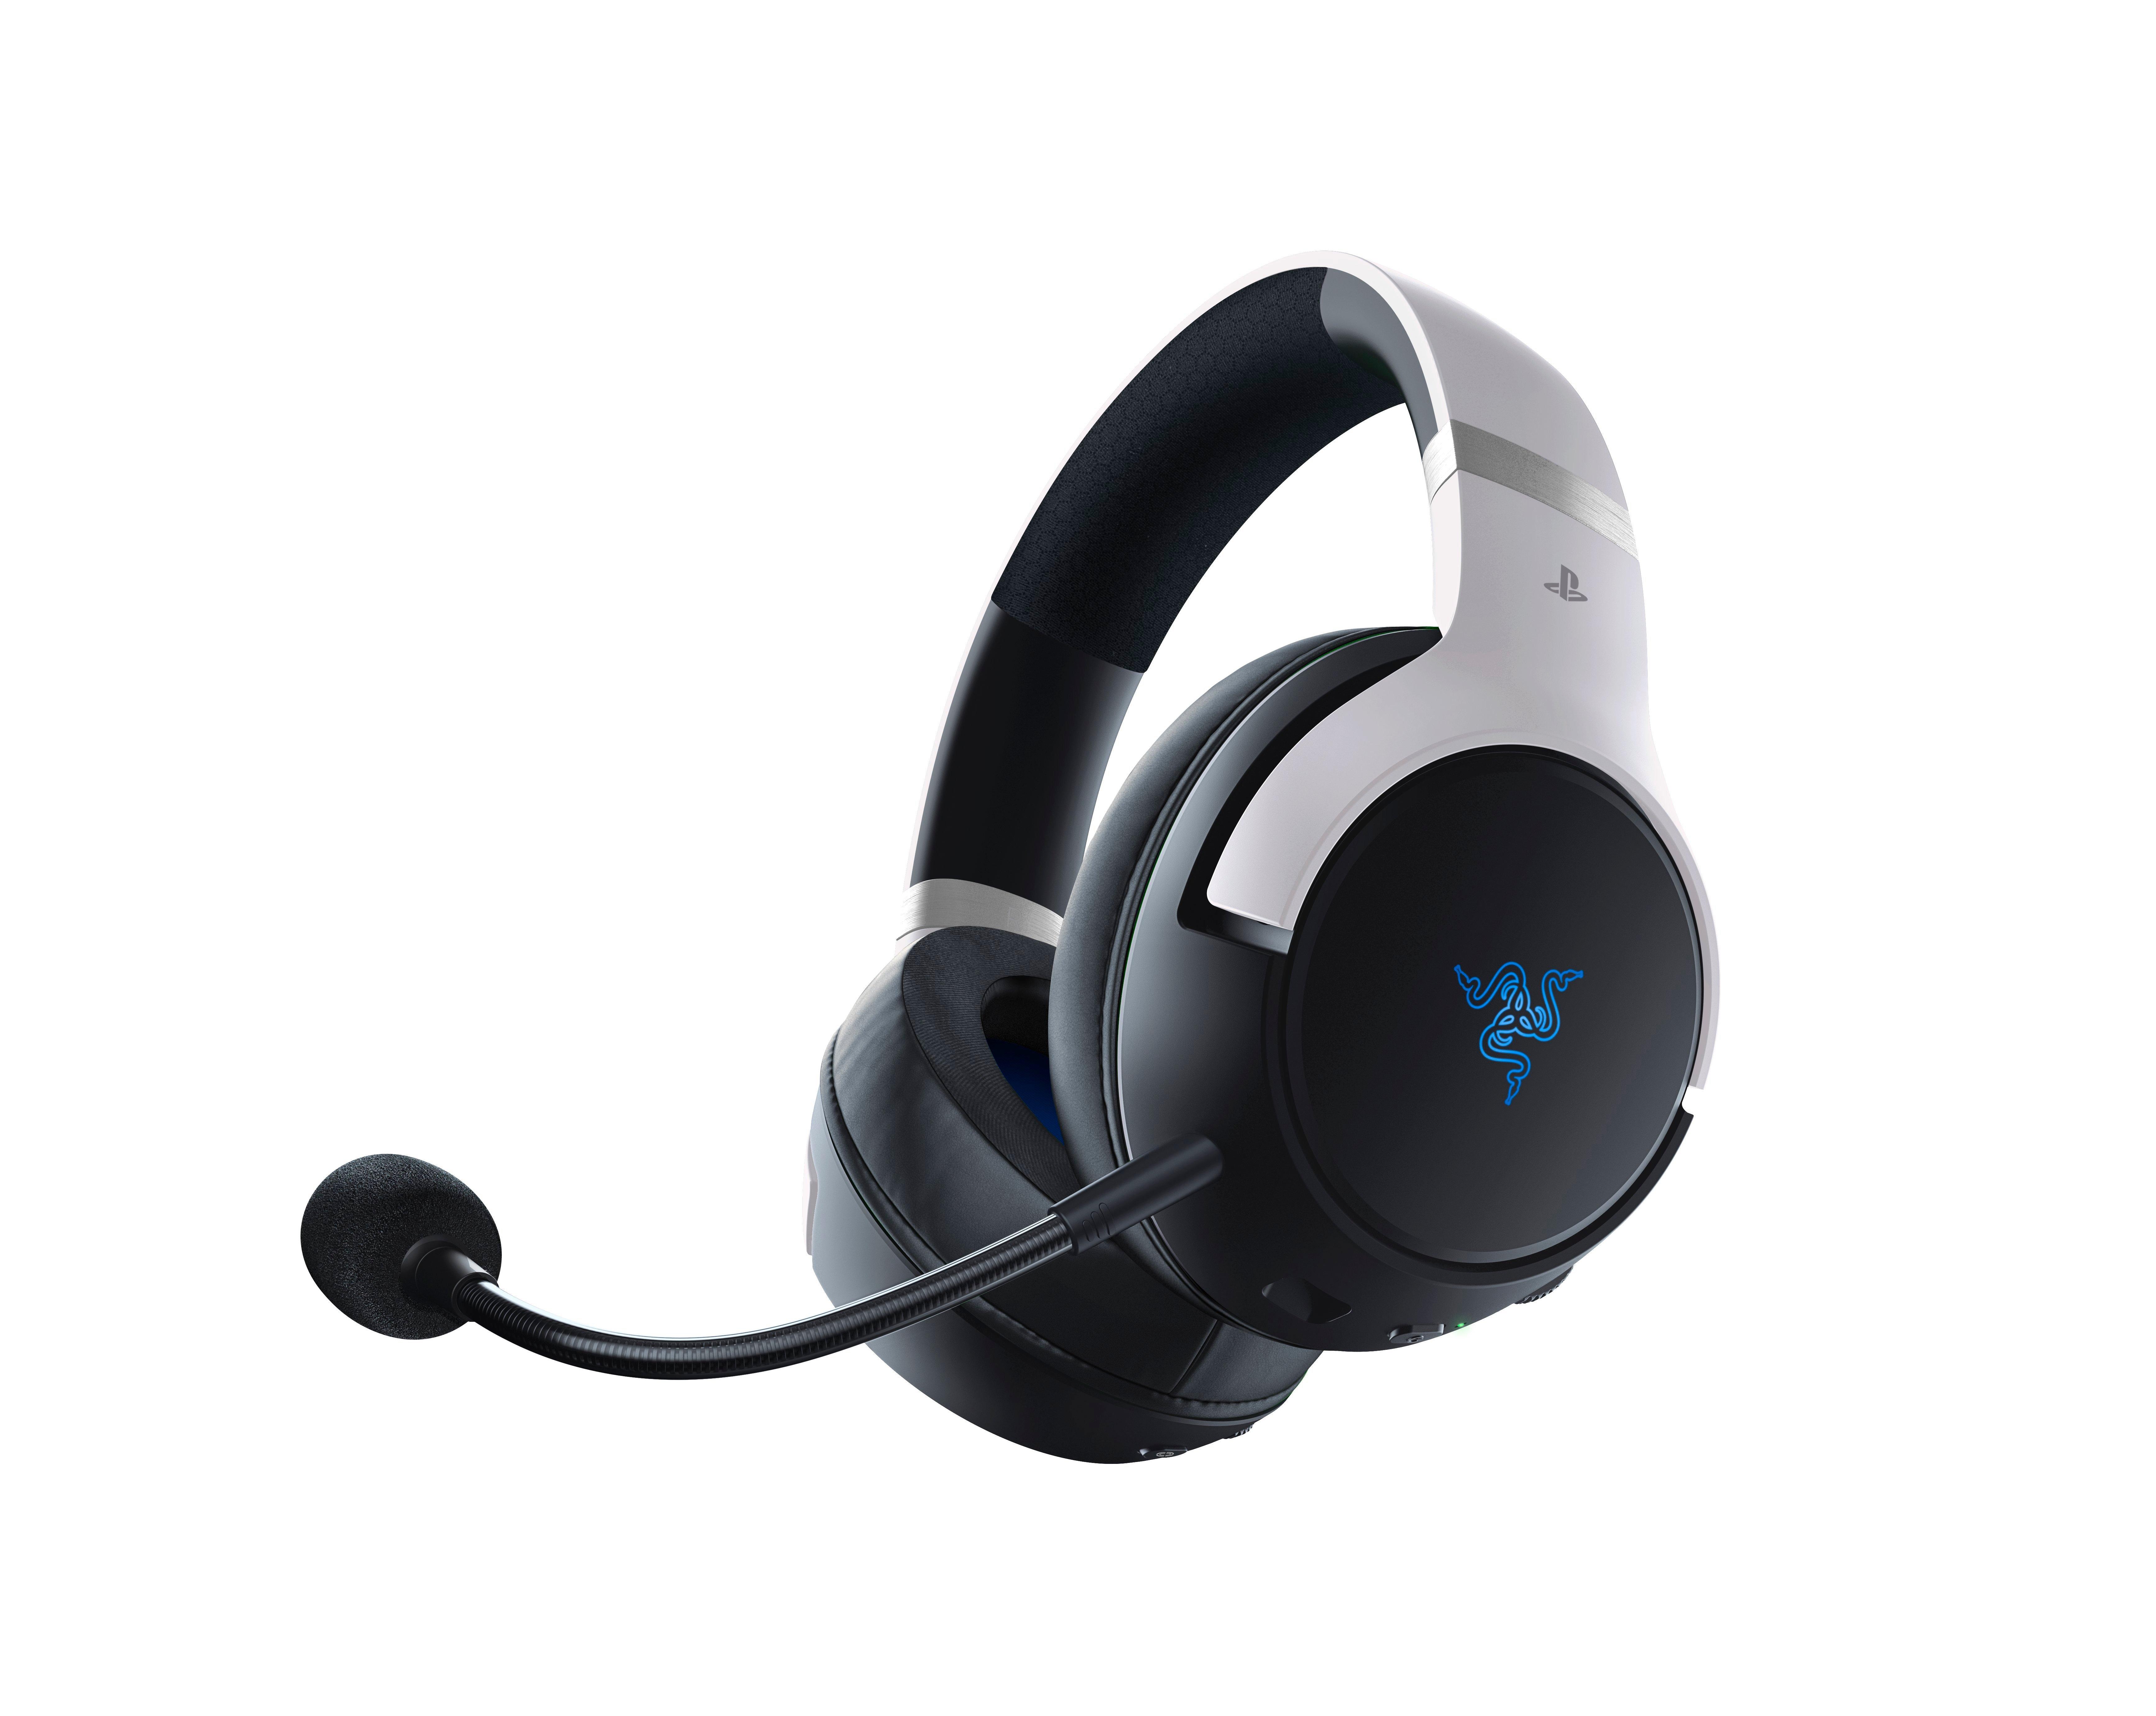  Razer Kaira HyperSpeed Wireless Gaming Headset for Playstation  5 / PS5, PS4, PC, Mobile: 50mm Drivers - HyperClear Cardioid Mic - Memory  Foam Cushions - Bluetooth - 30 Hr Battery - White & Black : Everything Else